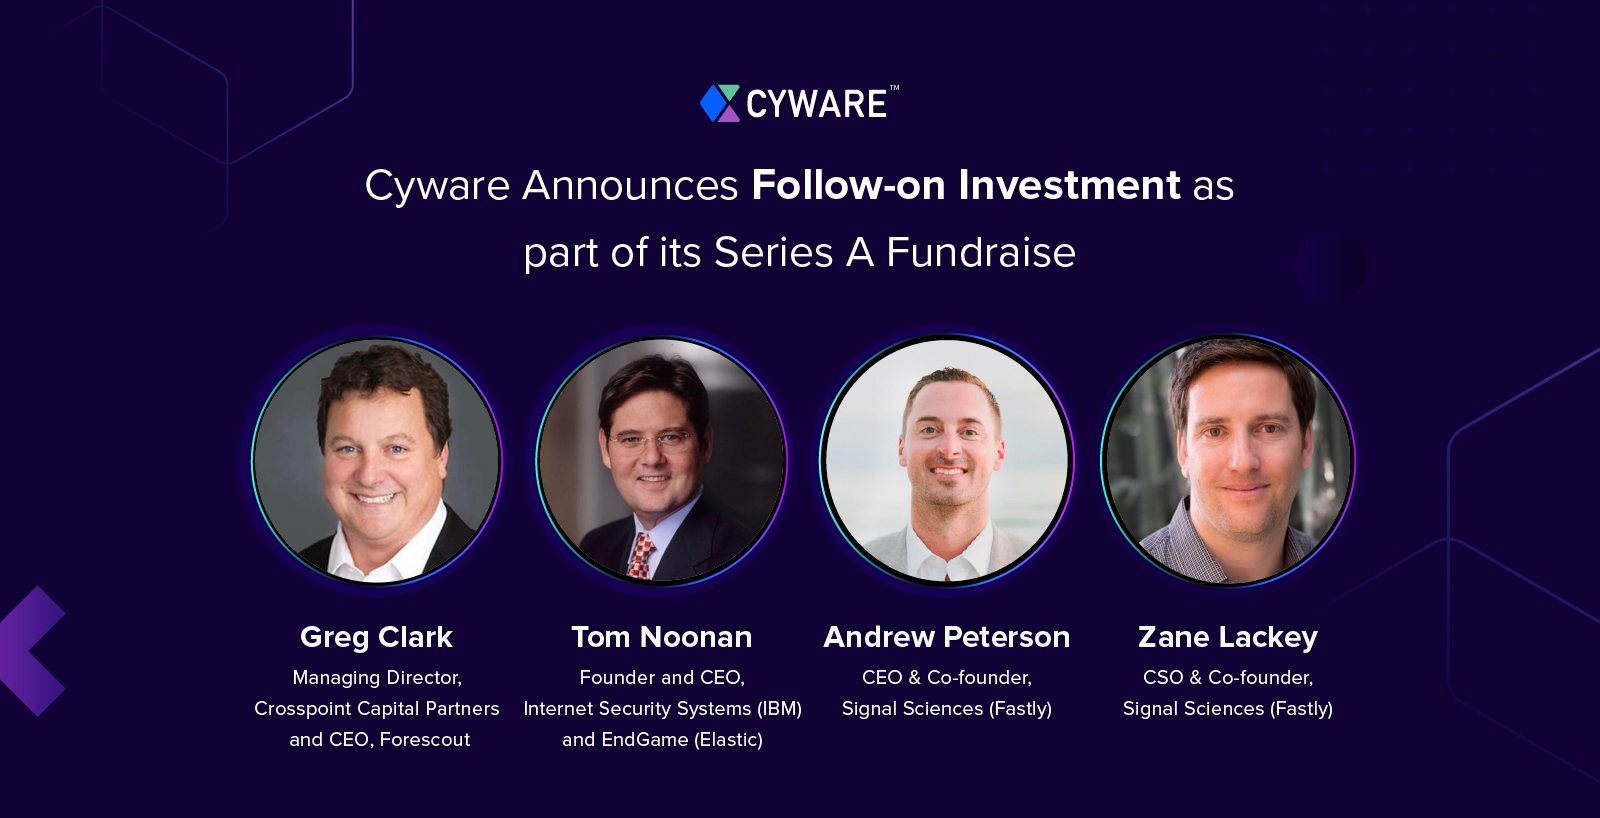 Cyware Announces Follow-on Investment as part of its Series A Fundraise